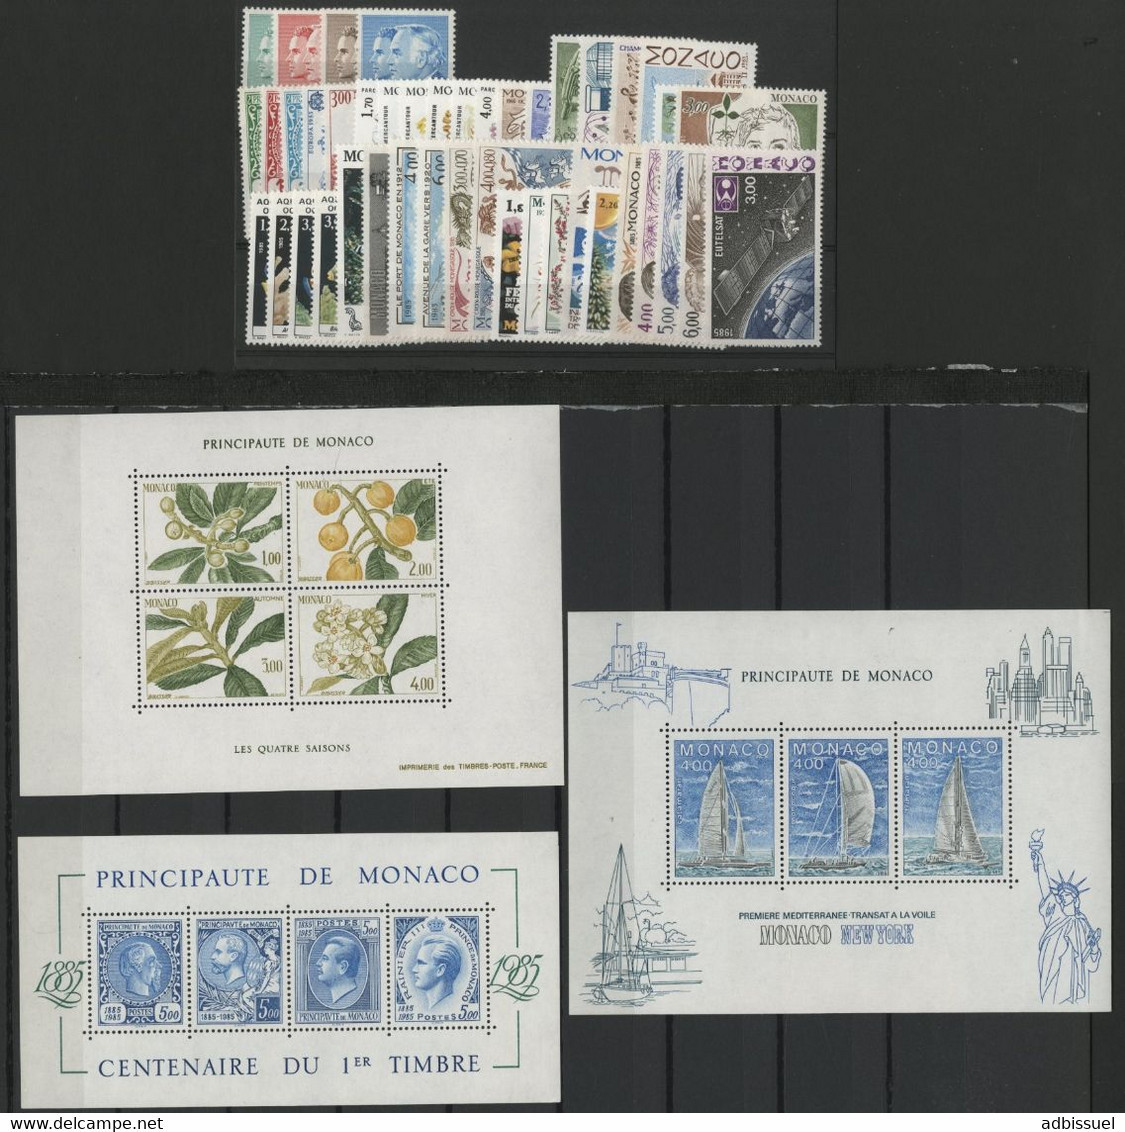 MONACO ANNEE COMPLETE 1985 COTE 119 € NEUFS ** (MNH) N° 1456 à 1509 Soit 54 Timbres. TB - Full Years